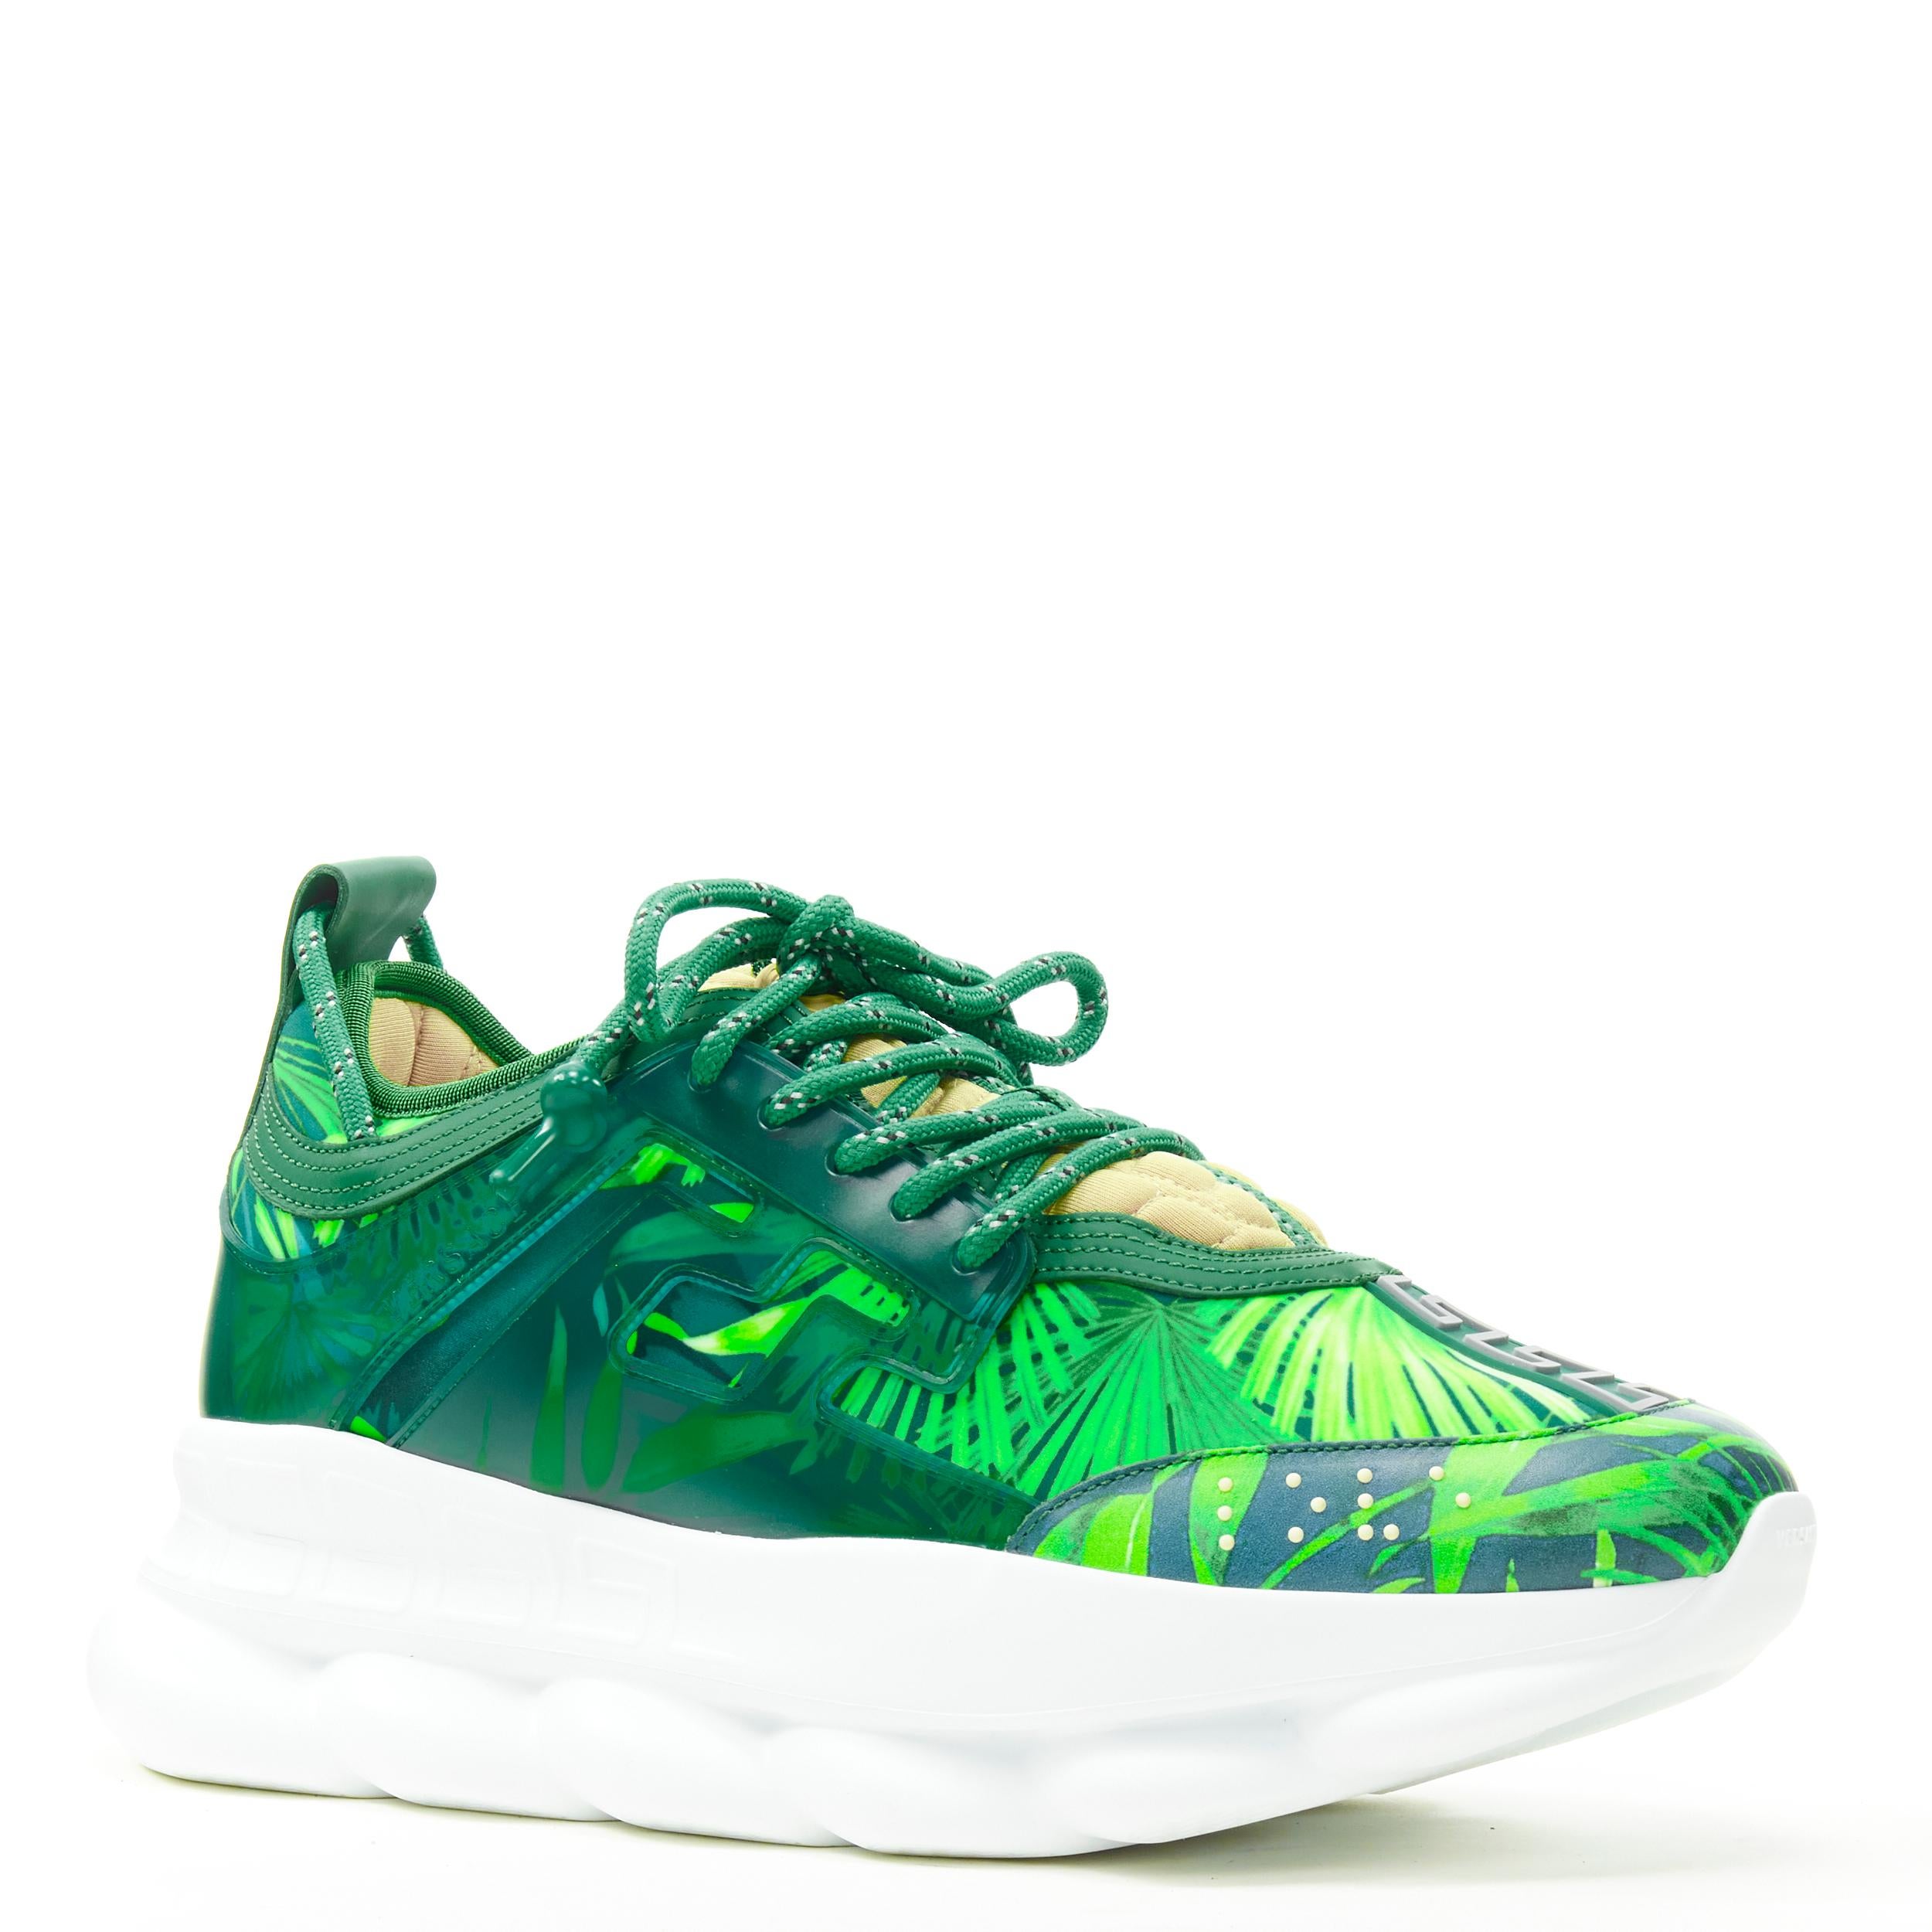 new VERSACE Chain Reaction Jungle Print green chunky sneaker EU38 US8 Limited 
Reference: TGAS/C00108 
Brand: Versace 
Designer: Donatella Versace 
Model: Chain Reaction 
Collection: Spring Summer 2020 Runway 
Material: Leather 
Color: Green